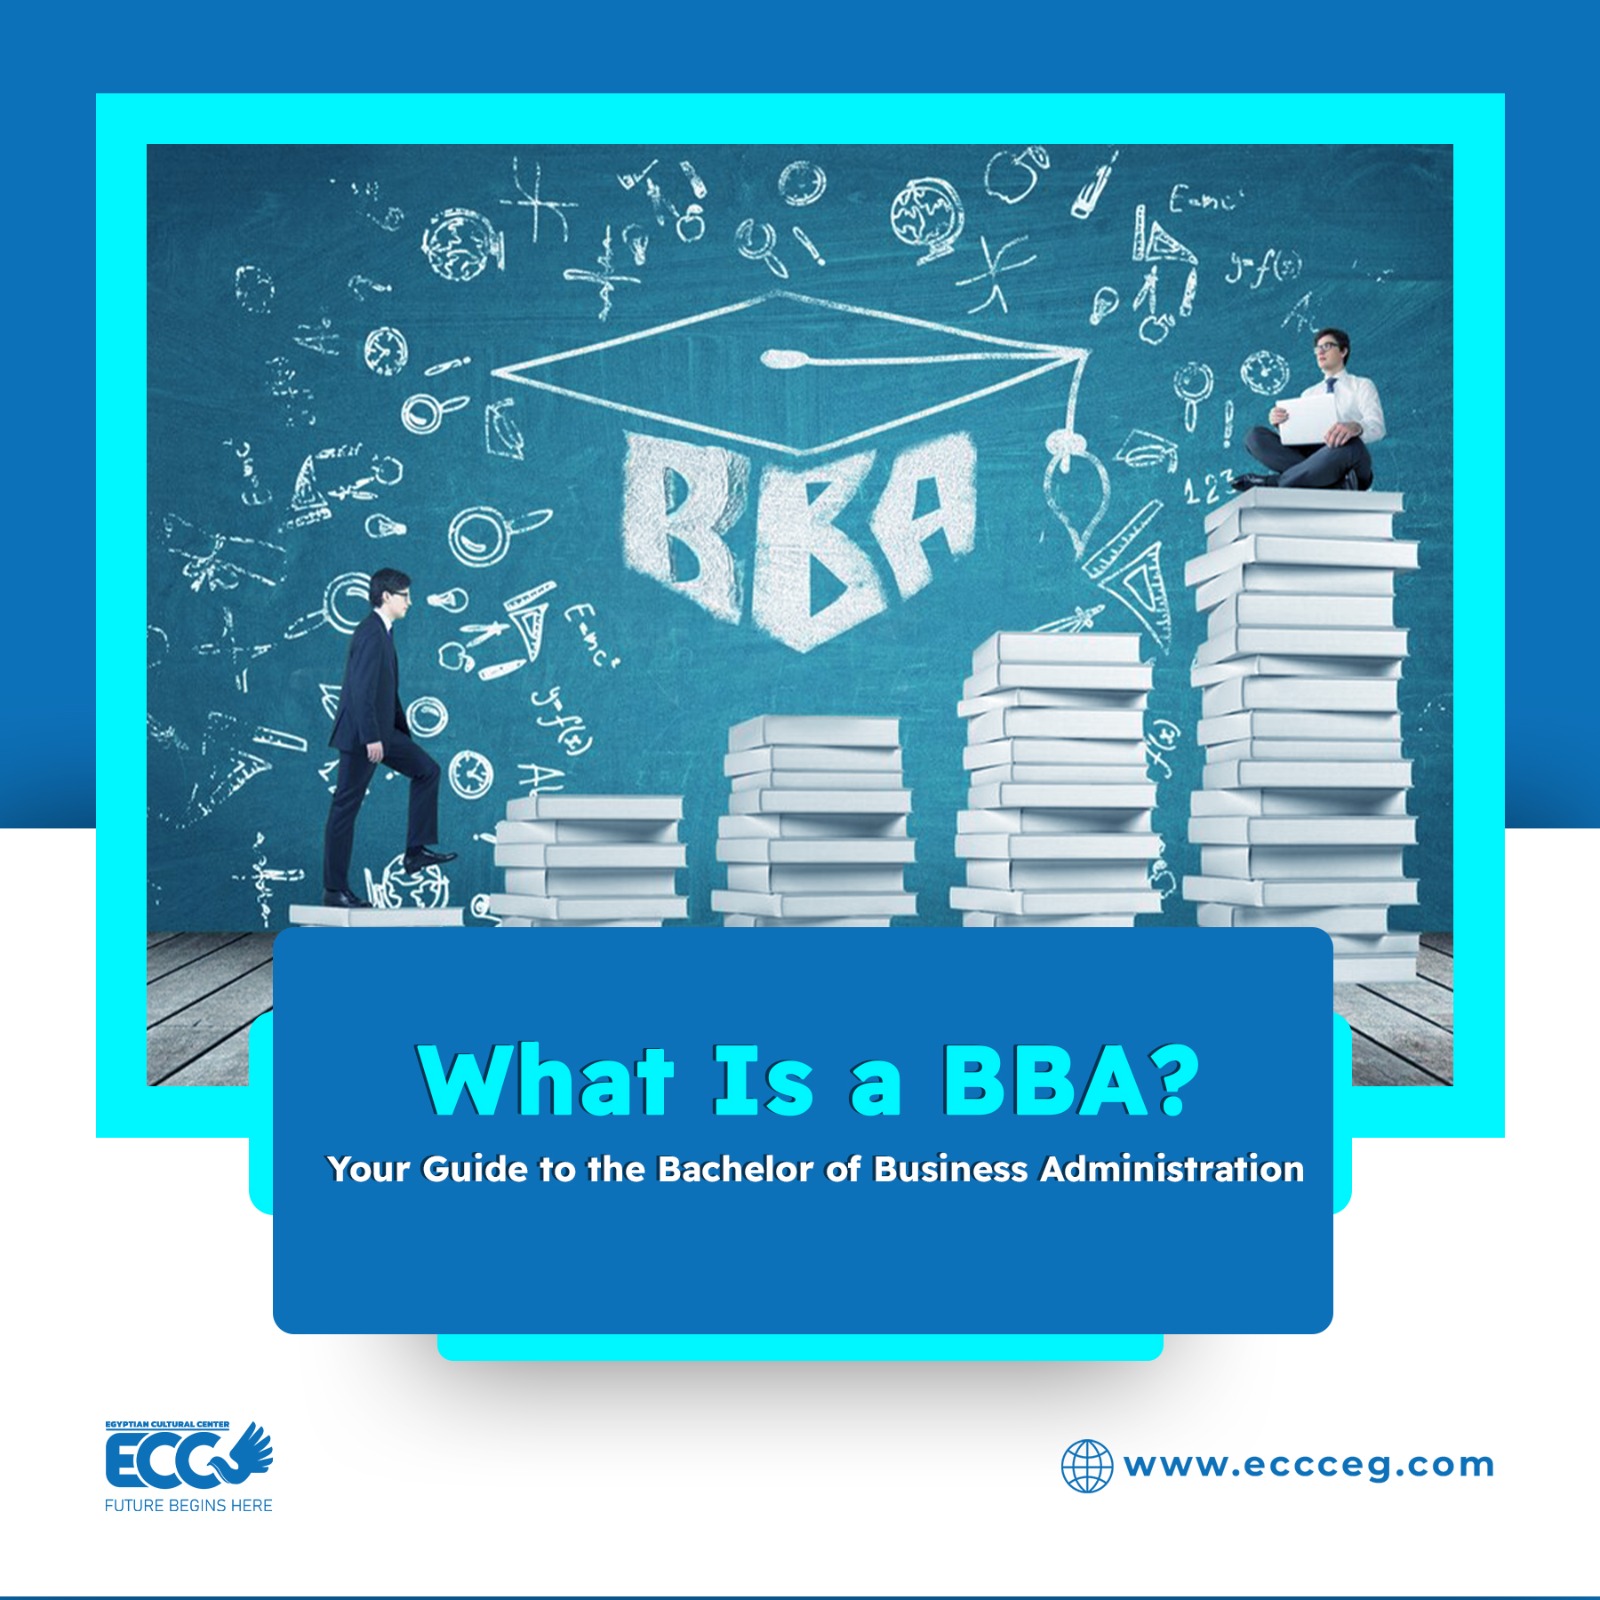 What Is a BBA? Your Guide to the Bachelor of Business Administration